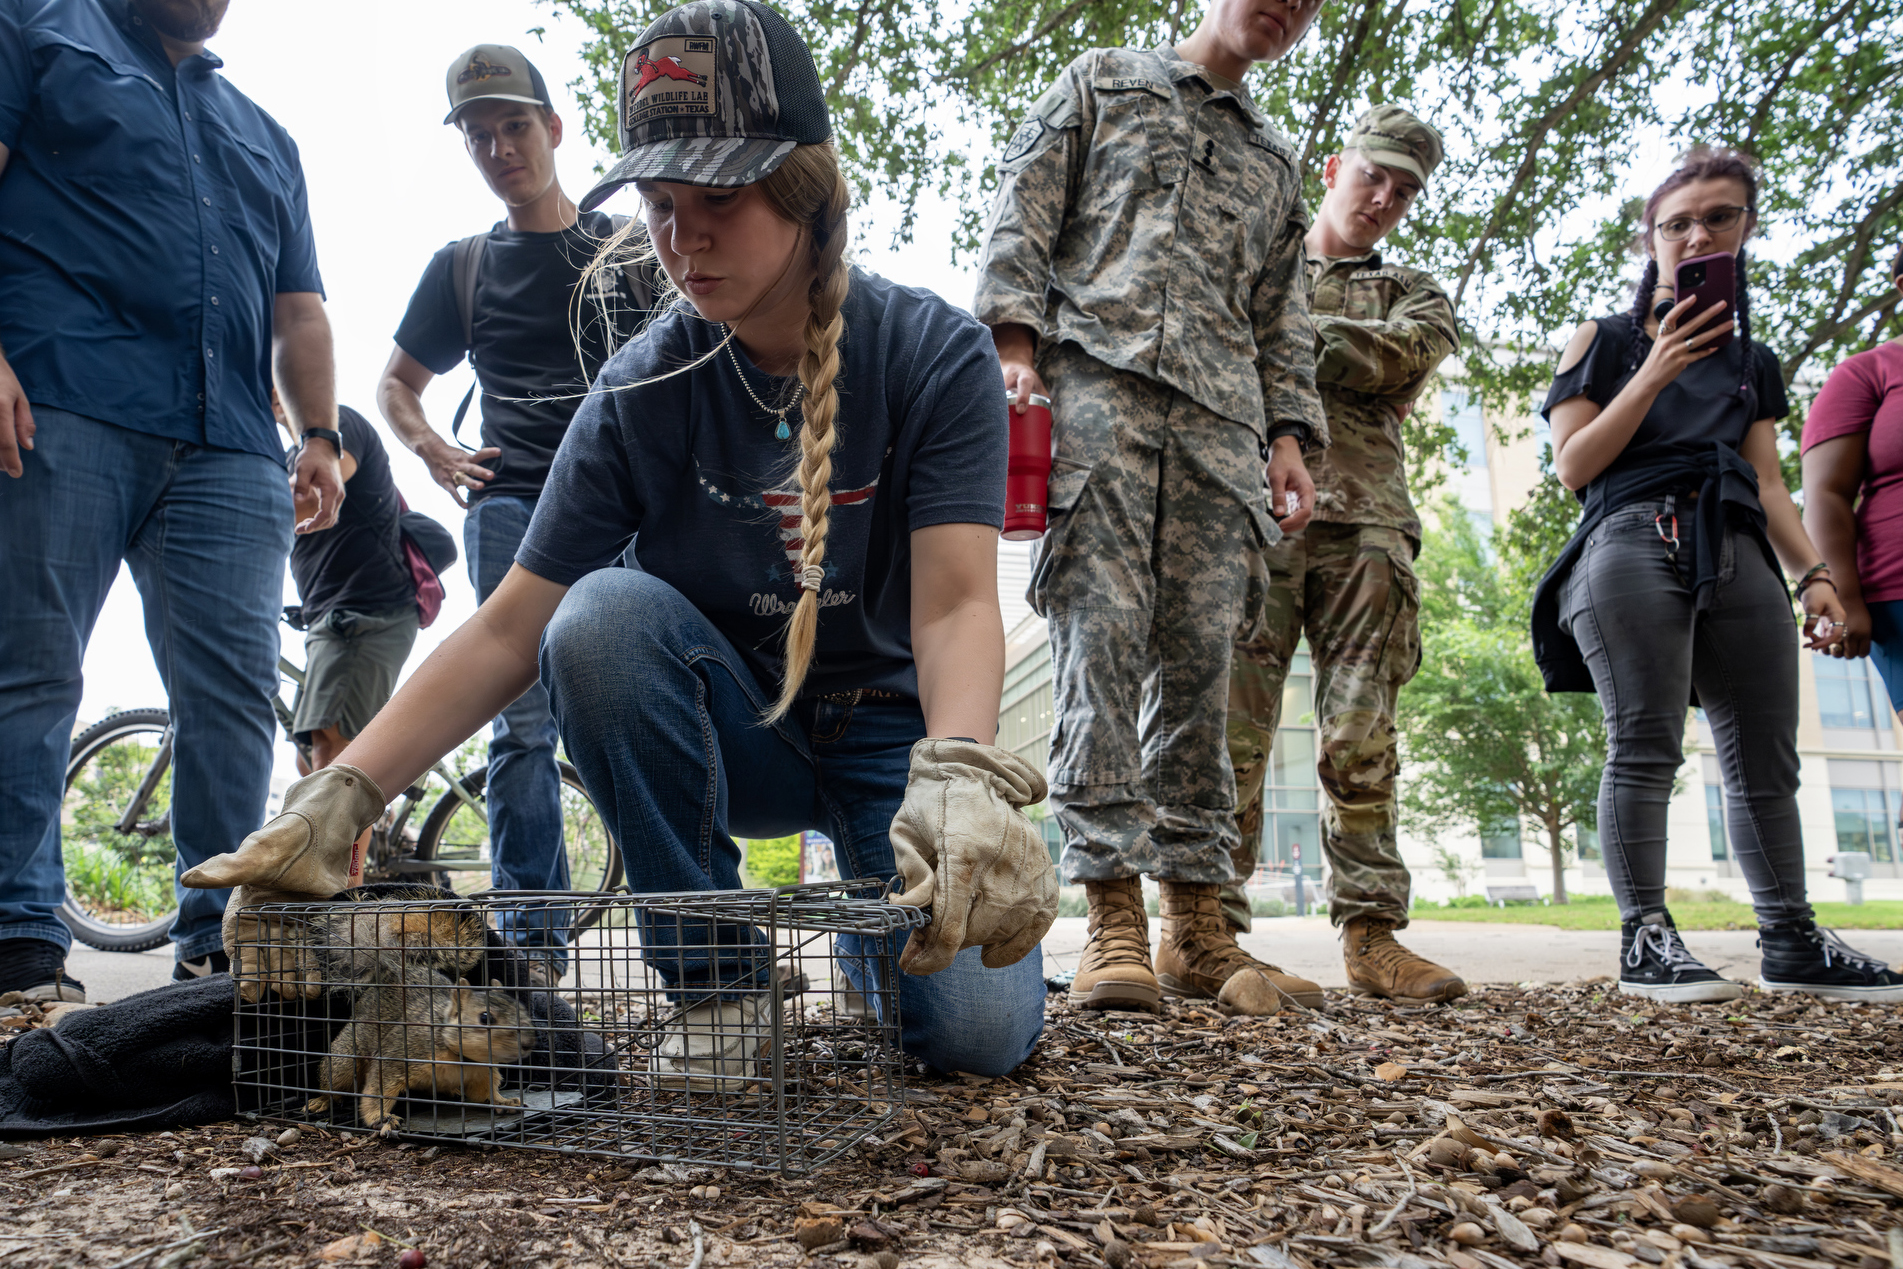 A student in a blue shirt and camouflage hat releases a squirrel with a radio frequency collar